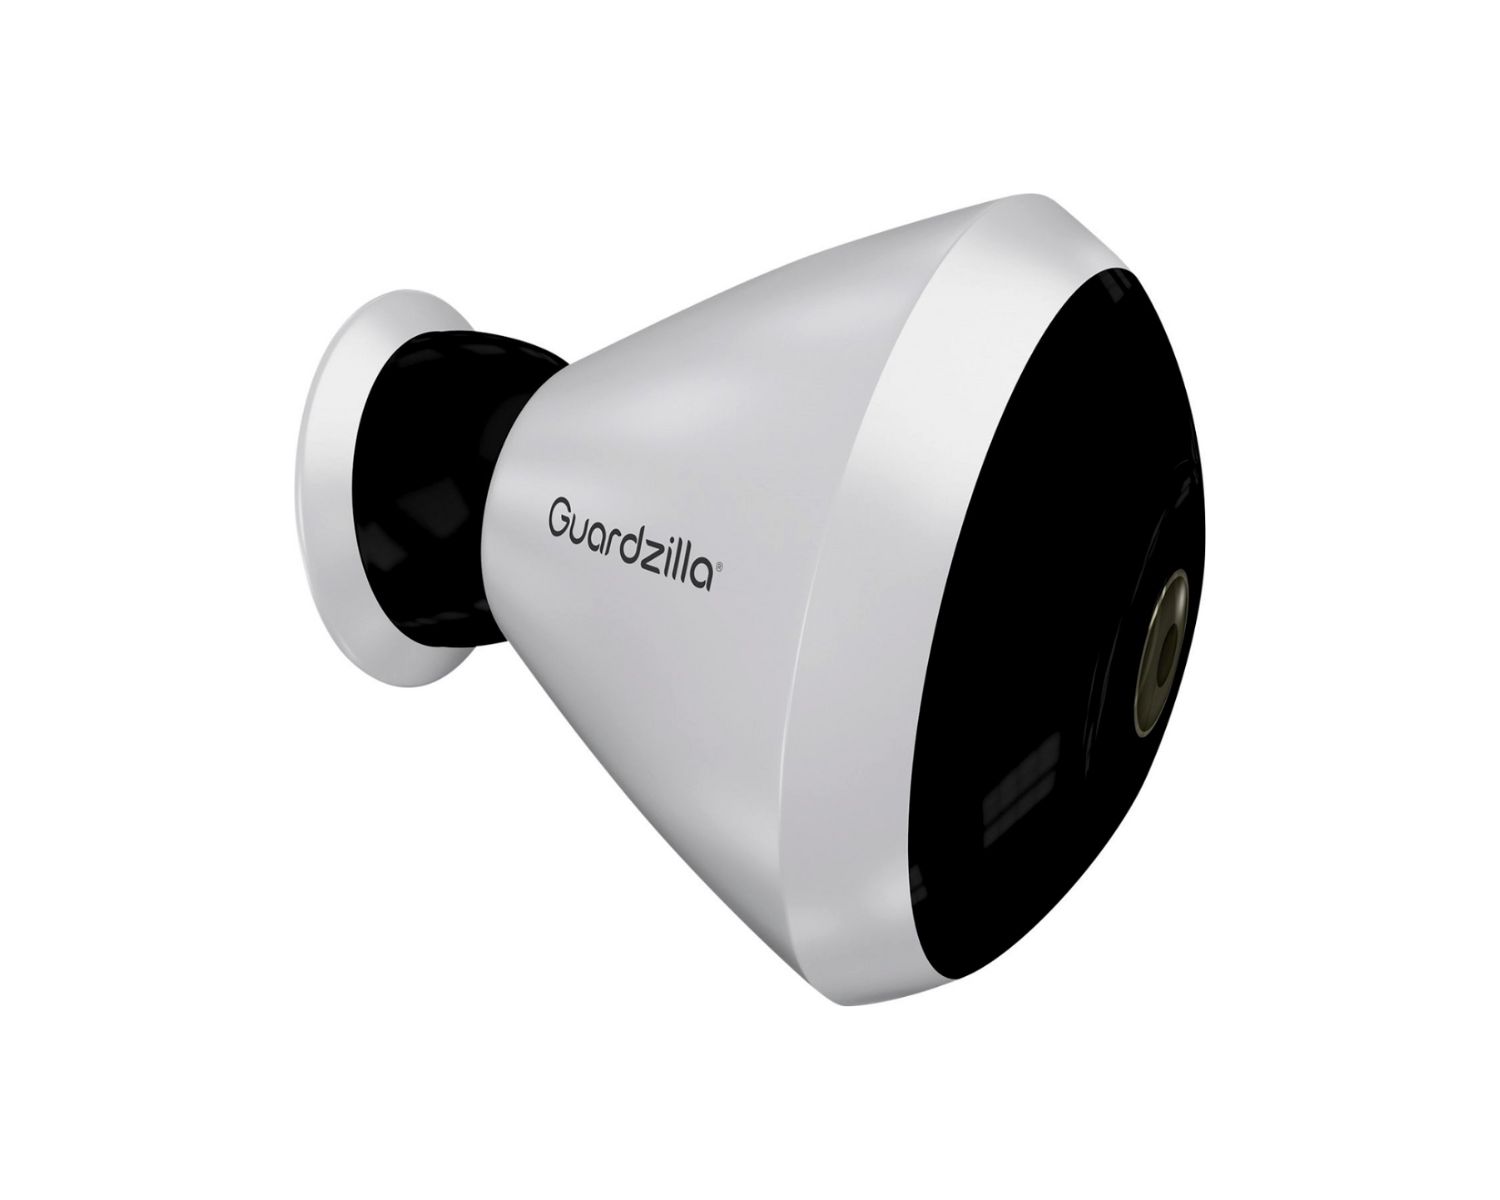 How Long To Update The Guardzilla Outdoor Camera